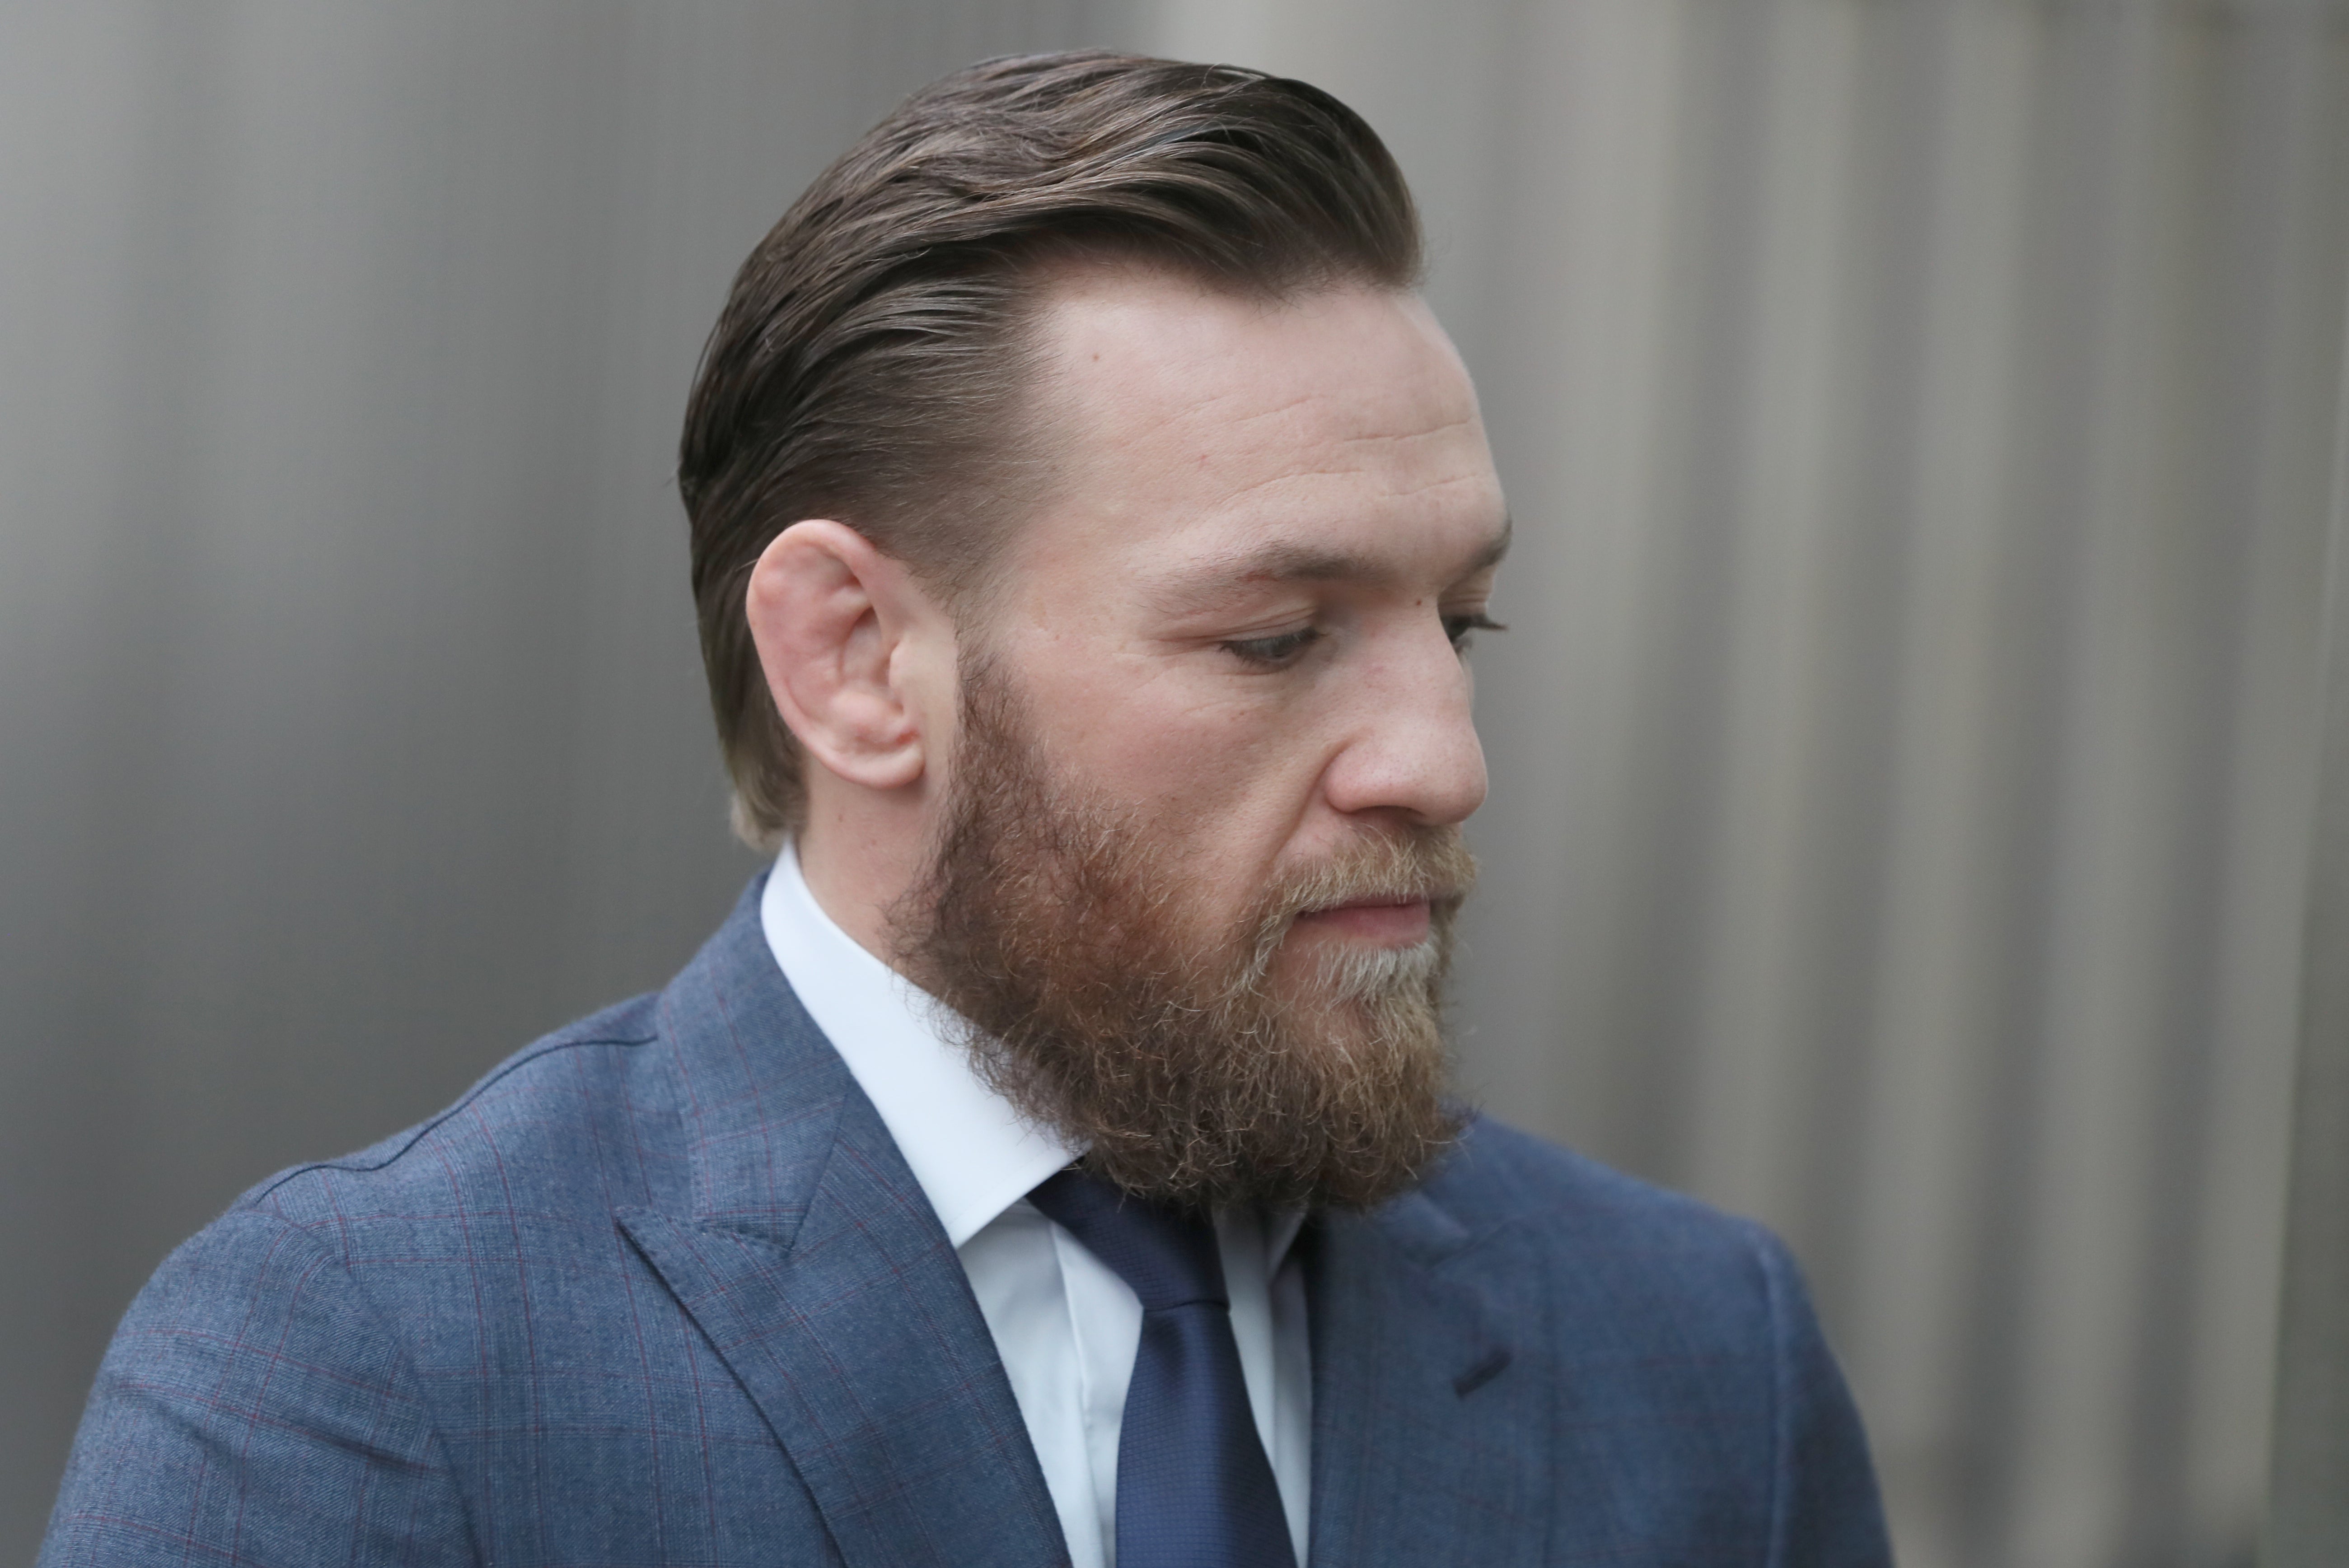 <p>Conor McGregor was at his Dublin pub before it was attacked, according to social media posts</p>